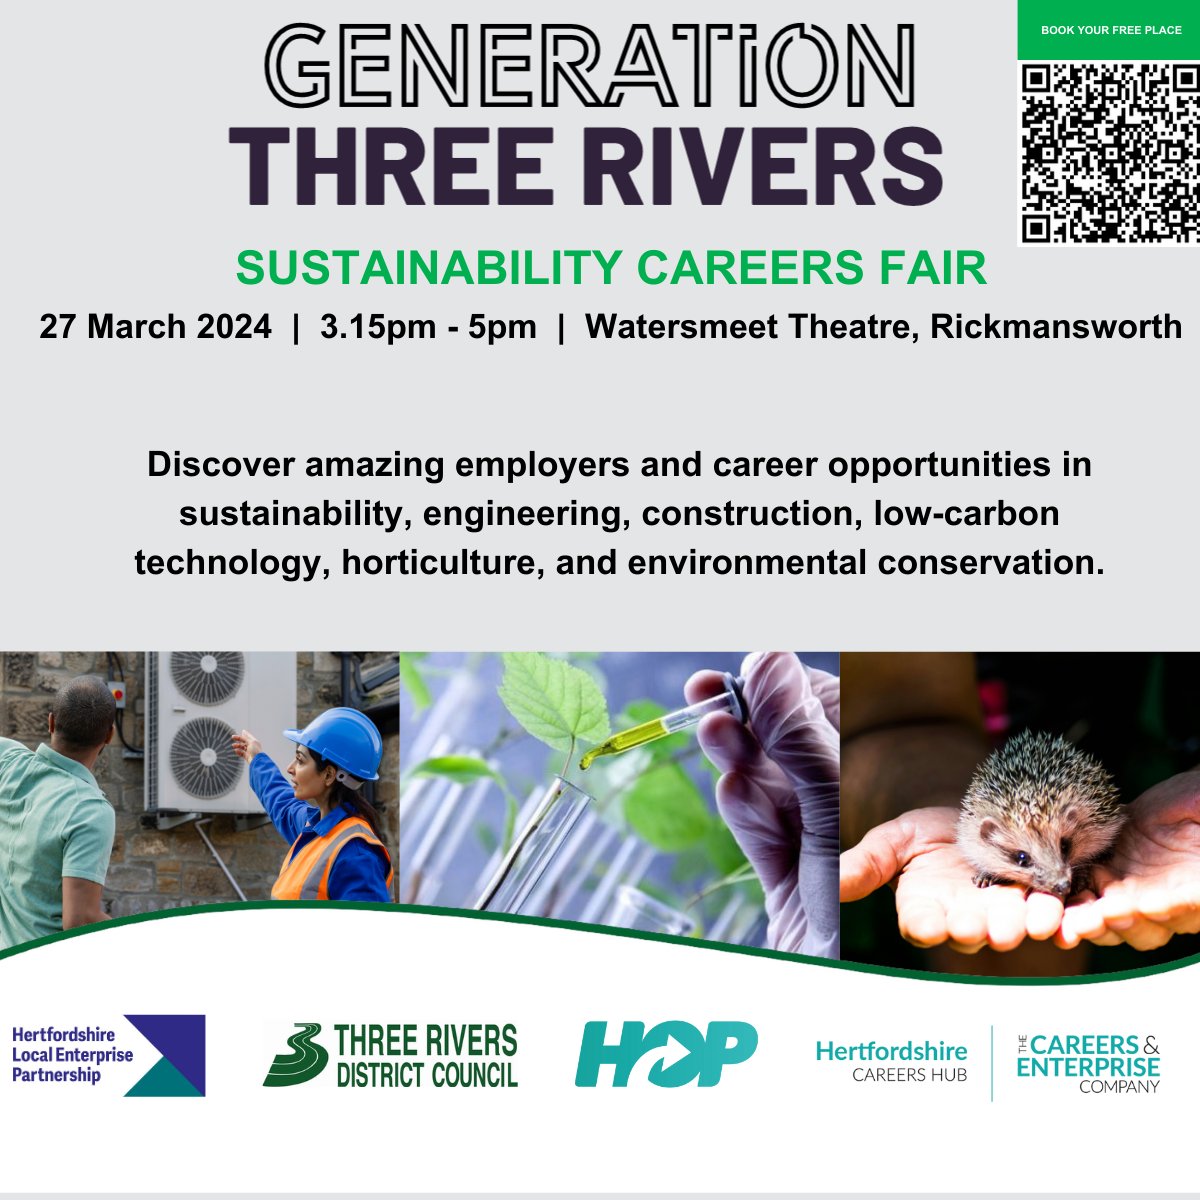 Join us for our #sustainability #careerfair Interested in sustainability, engineering, construction, low-carbon technology & environmental conservation? Meet with major employers! 👉 ow.ly/FKpy50QLnyZ #ThreeRivers #Hertfordshire @hertscc @Hopinto_herts @WatersmeetVenue